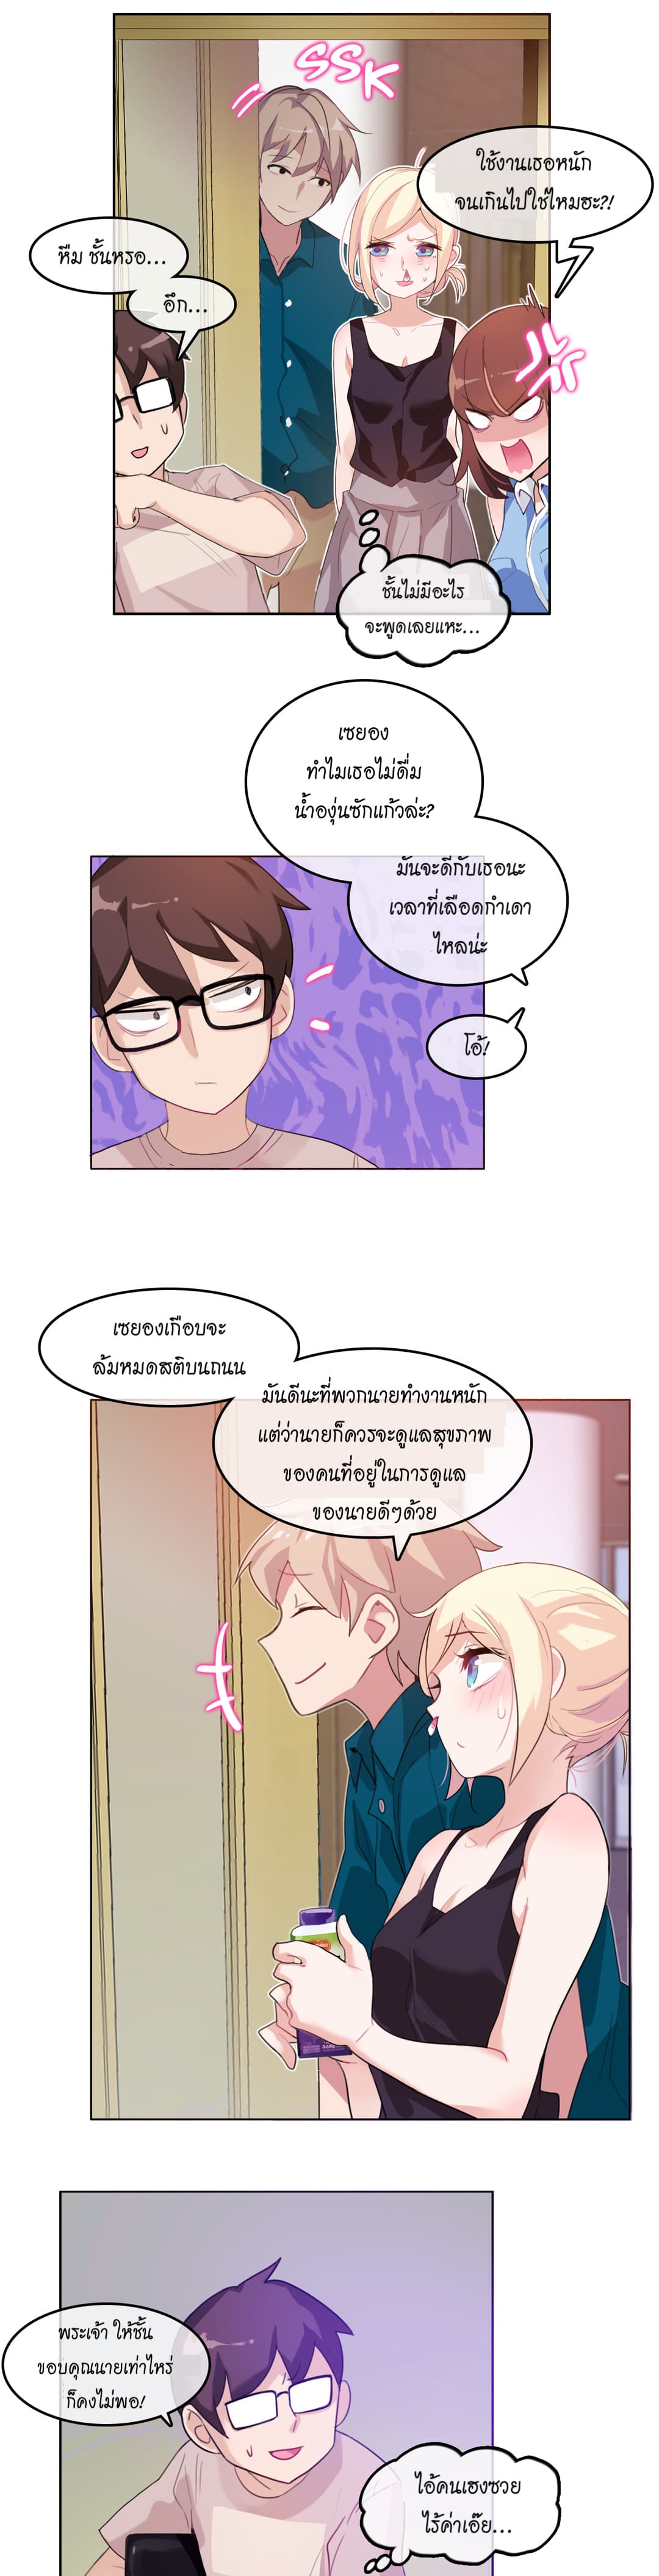 A Pervert’s Daily Life 6 (2)